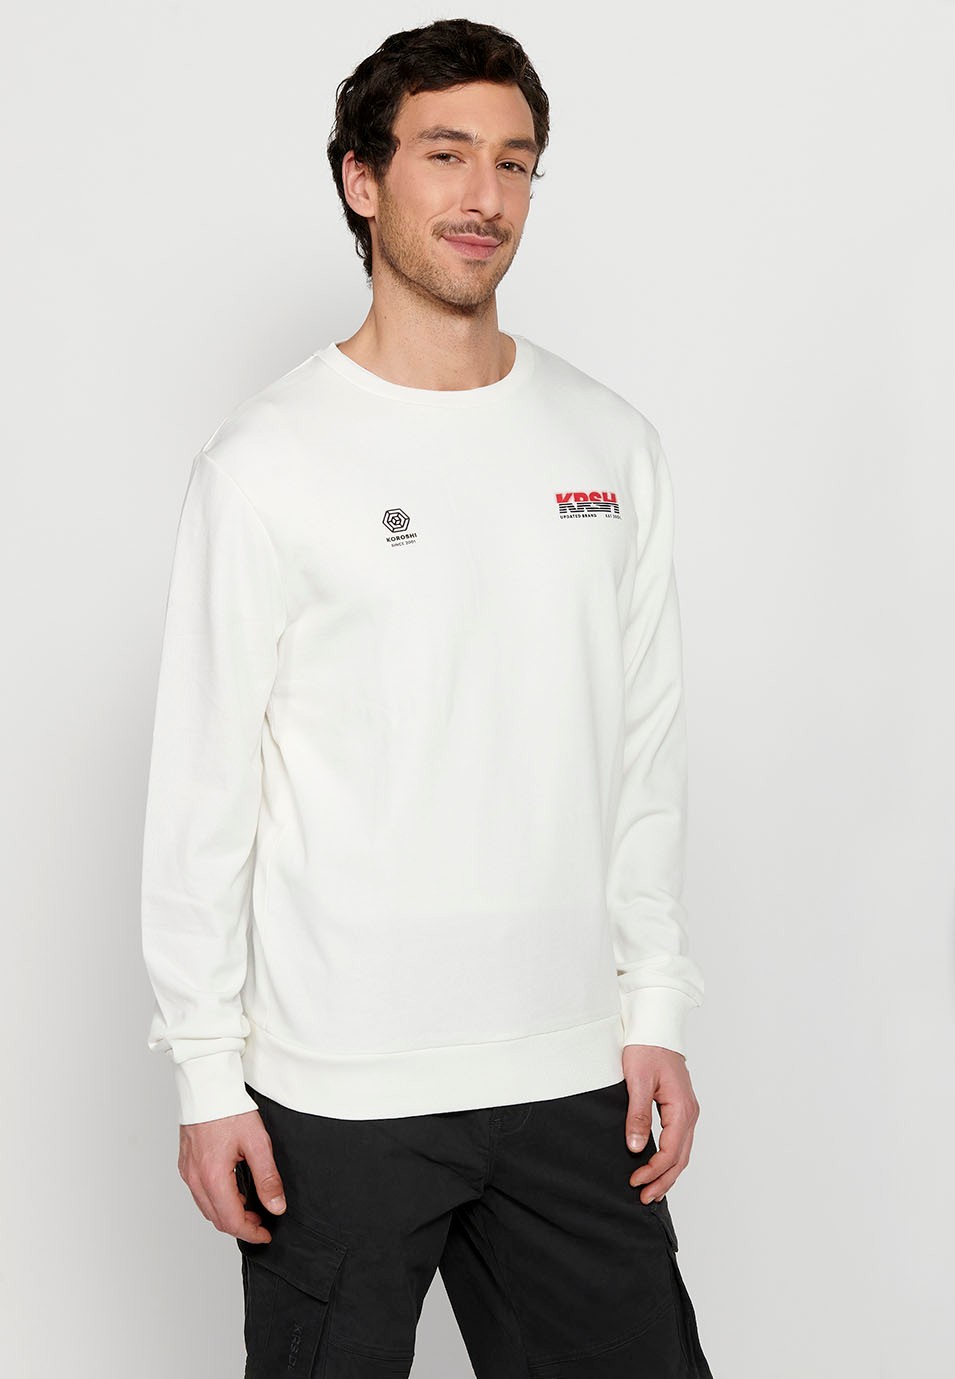 Long-sleeved sweatshirt with round neck and back detail in White for Men